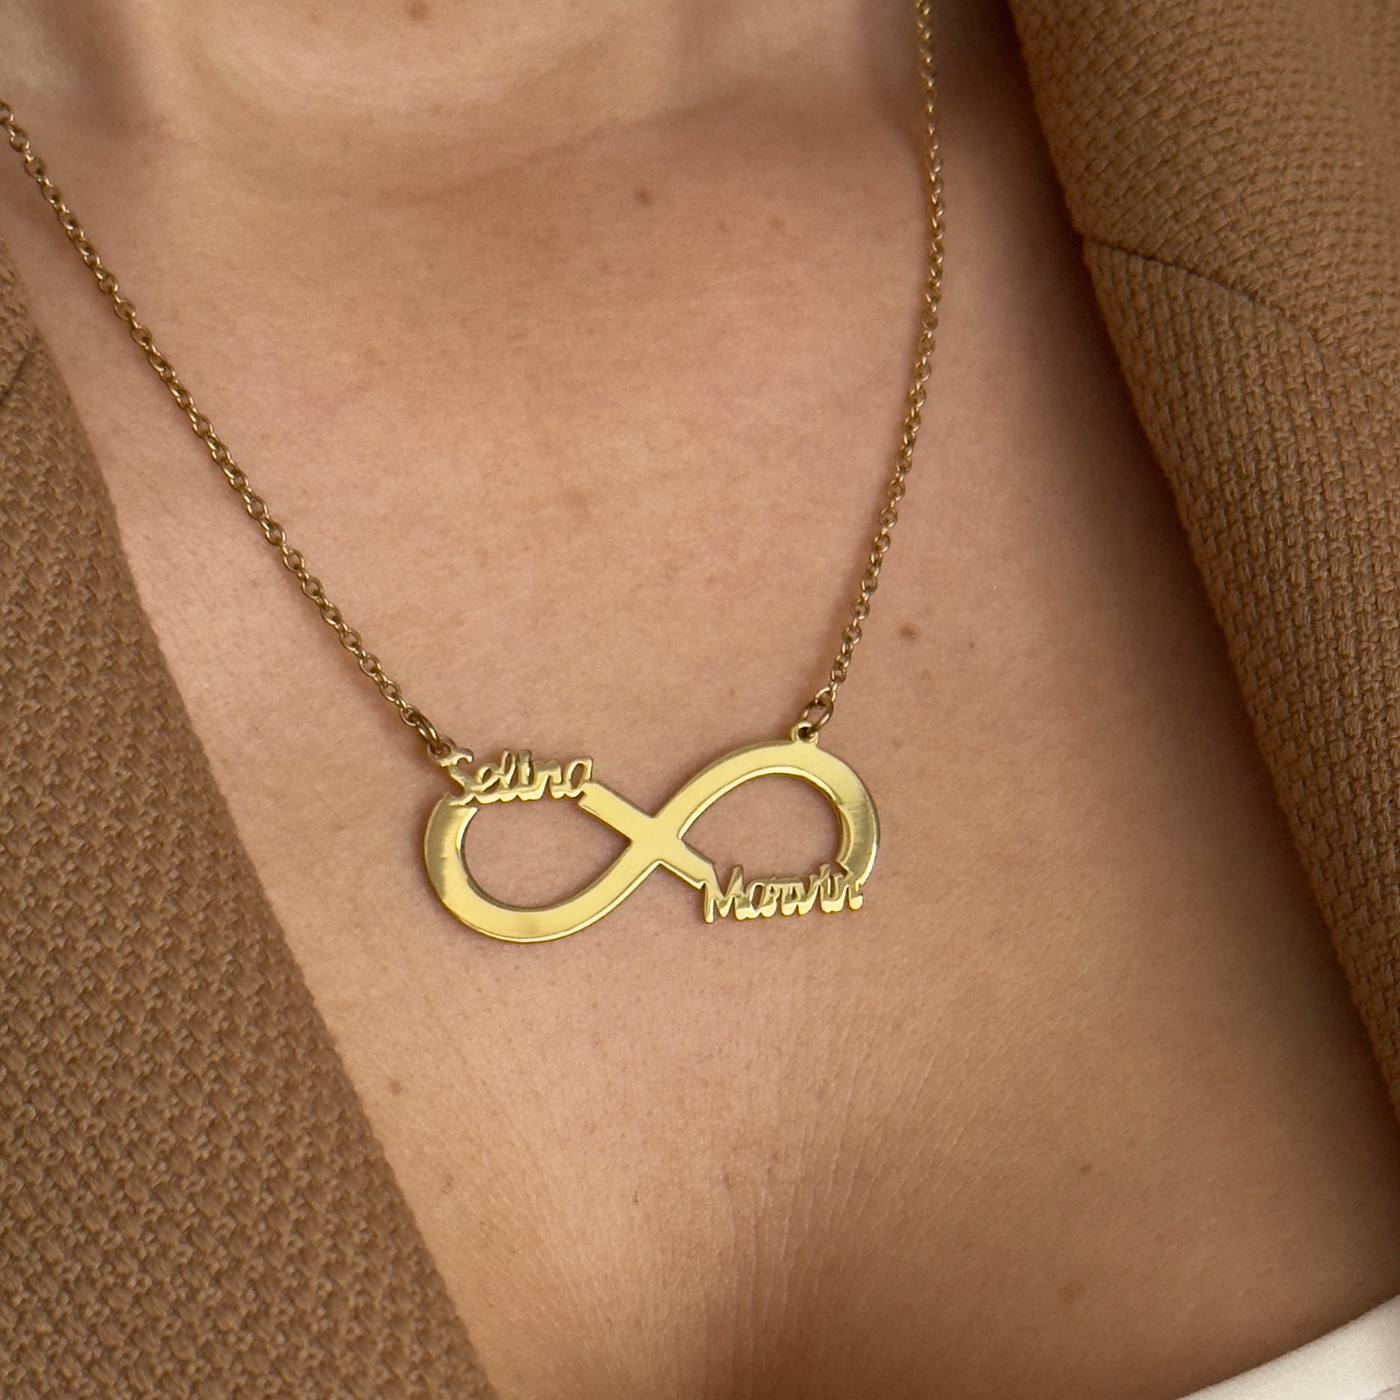 Infinity name necklace with name